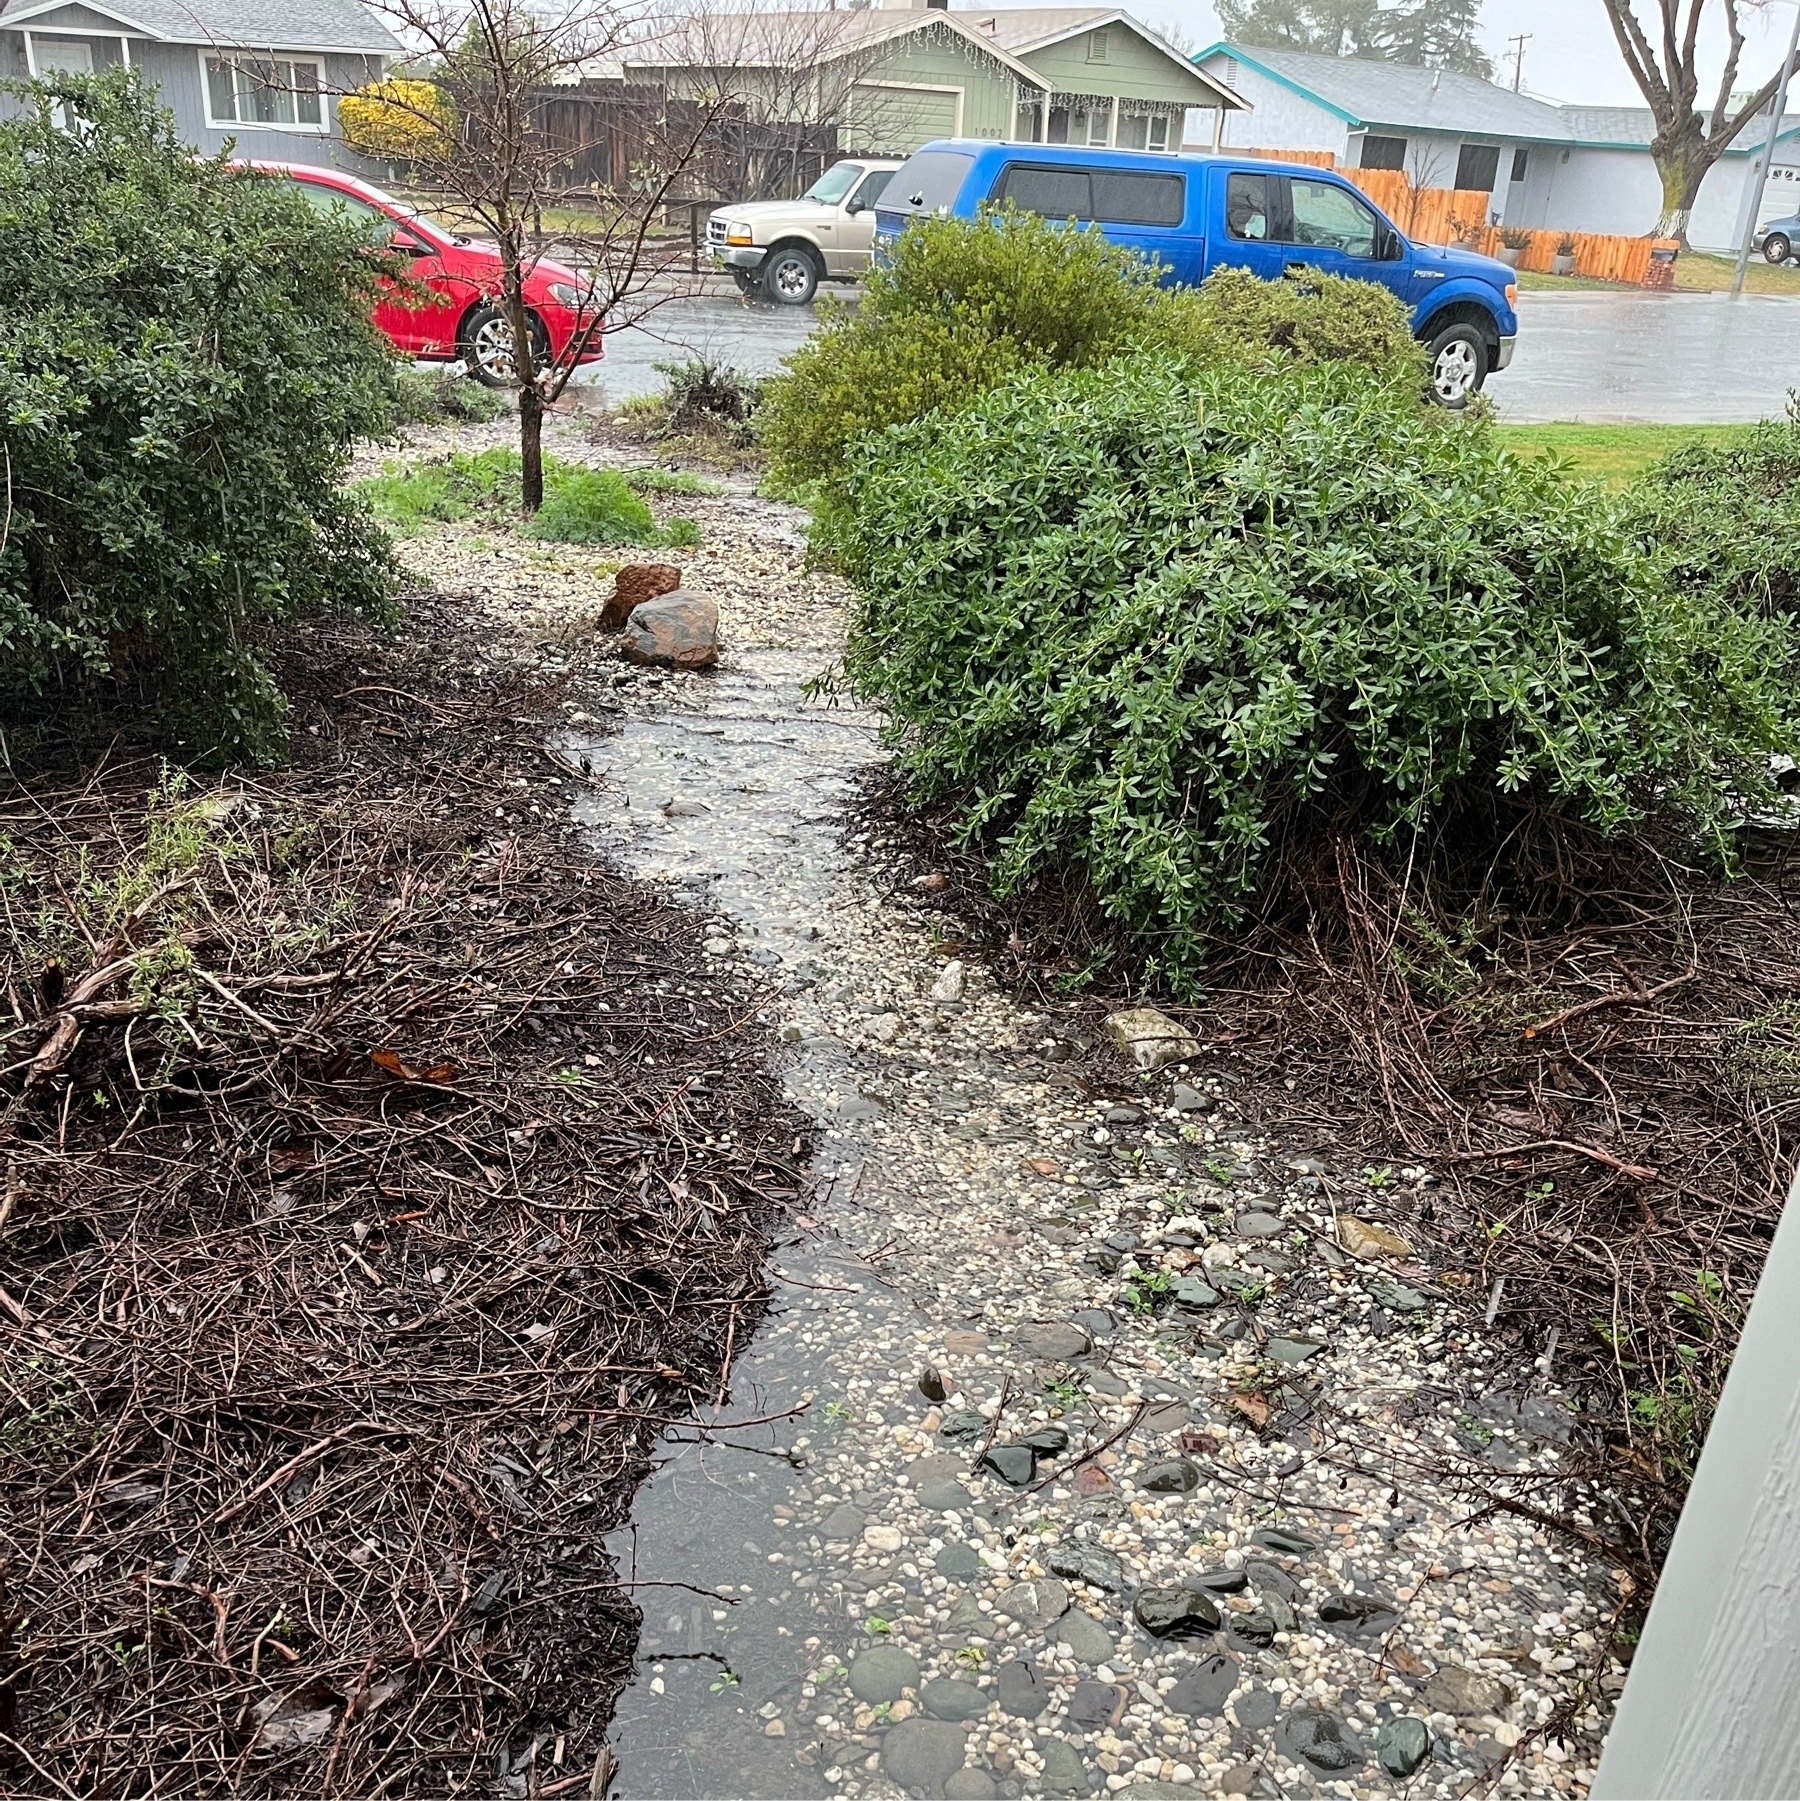 A narrow 3/4 inch gravel faux creek draining a downspout to the road. there's native vegetation surrounding the creek asking with wood chips. A residential street is in the background along with a bright red VW Golf.